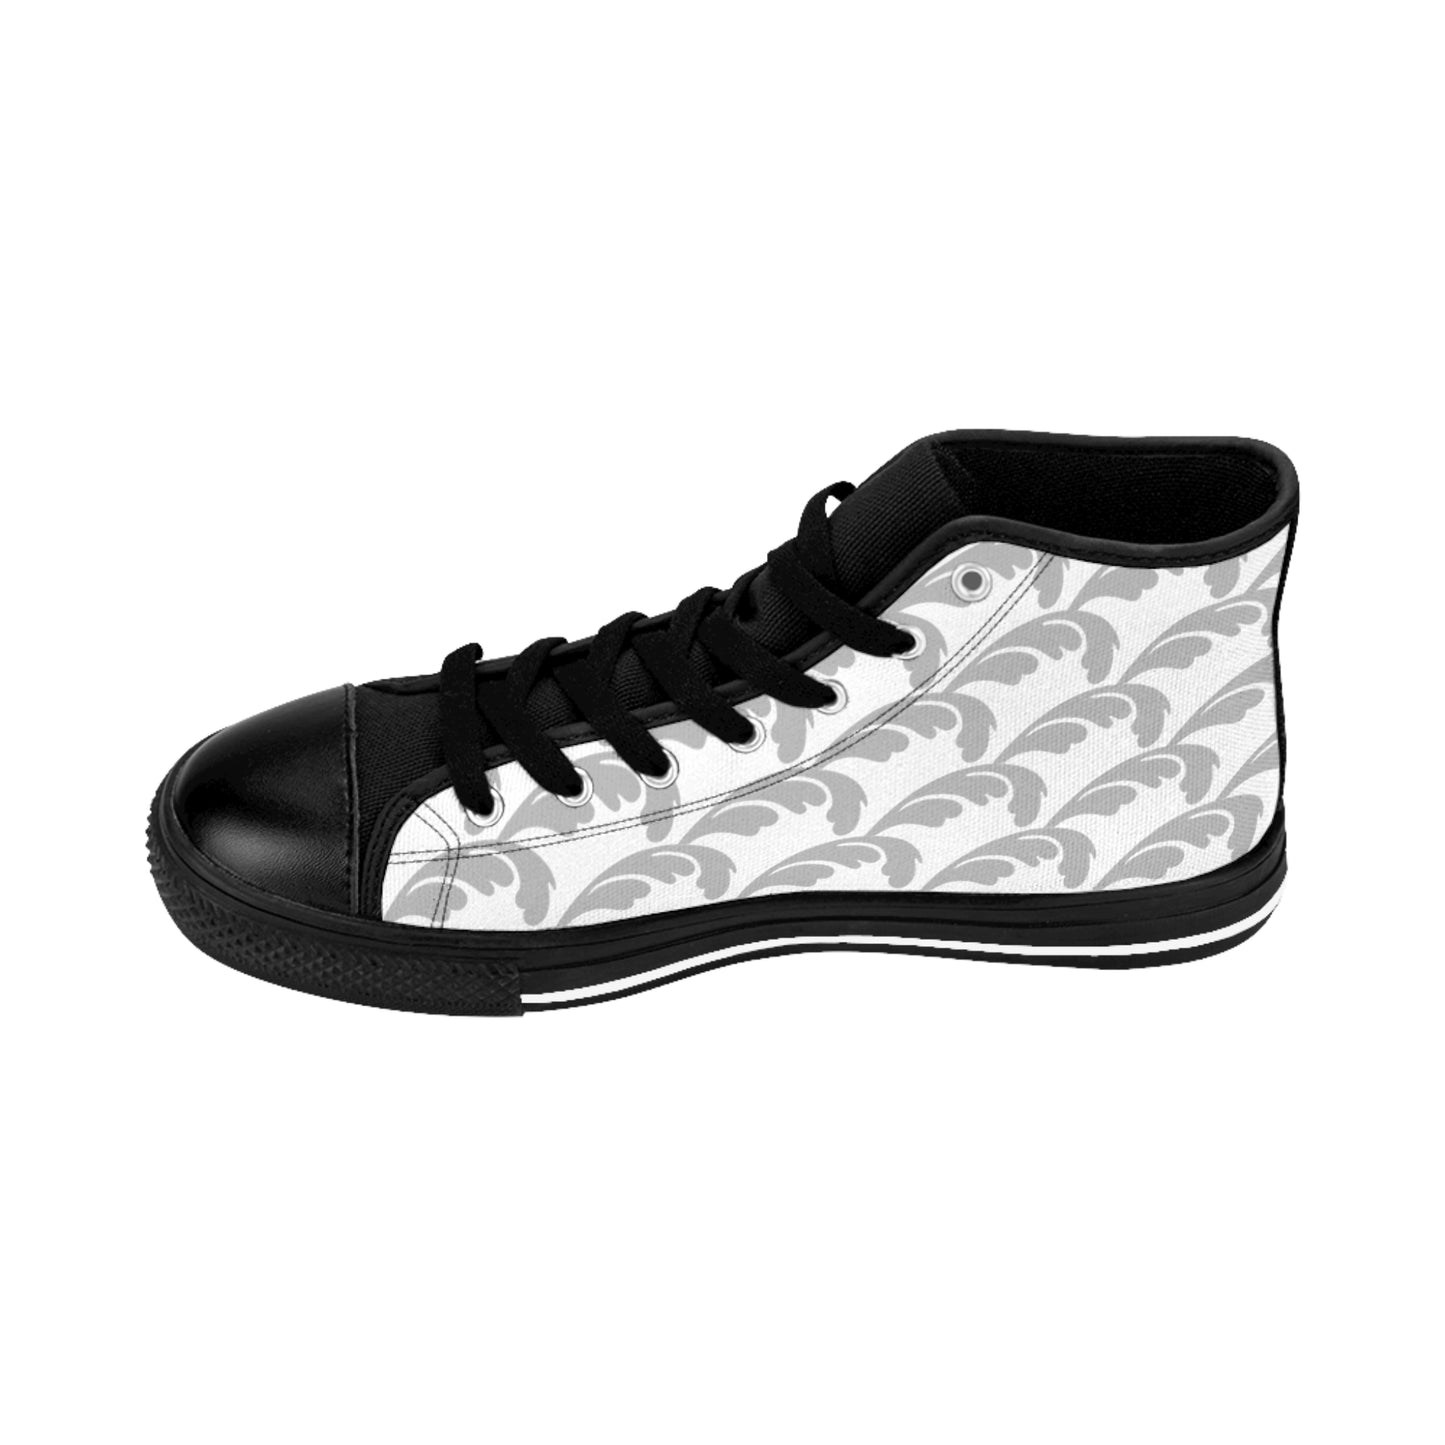 Women's Beautiful Beloved One Flourish - High-top Sneakers (wht/silver)